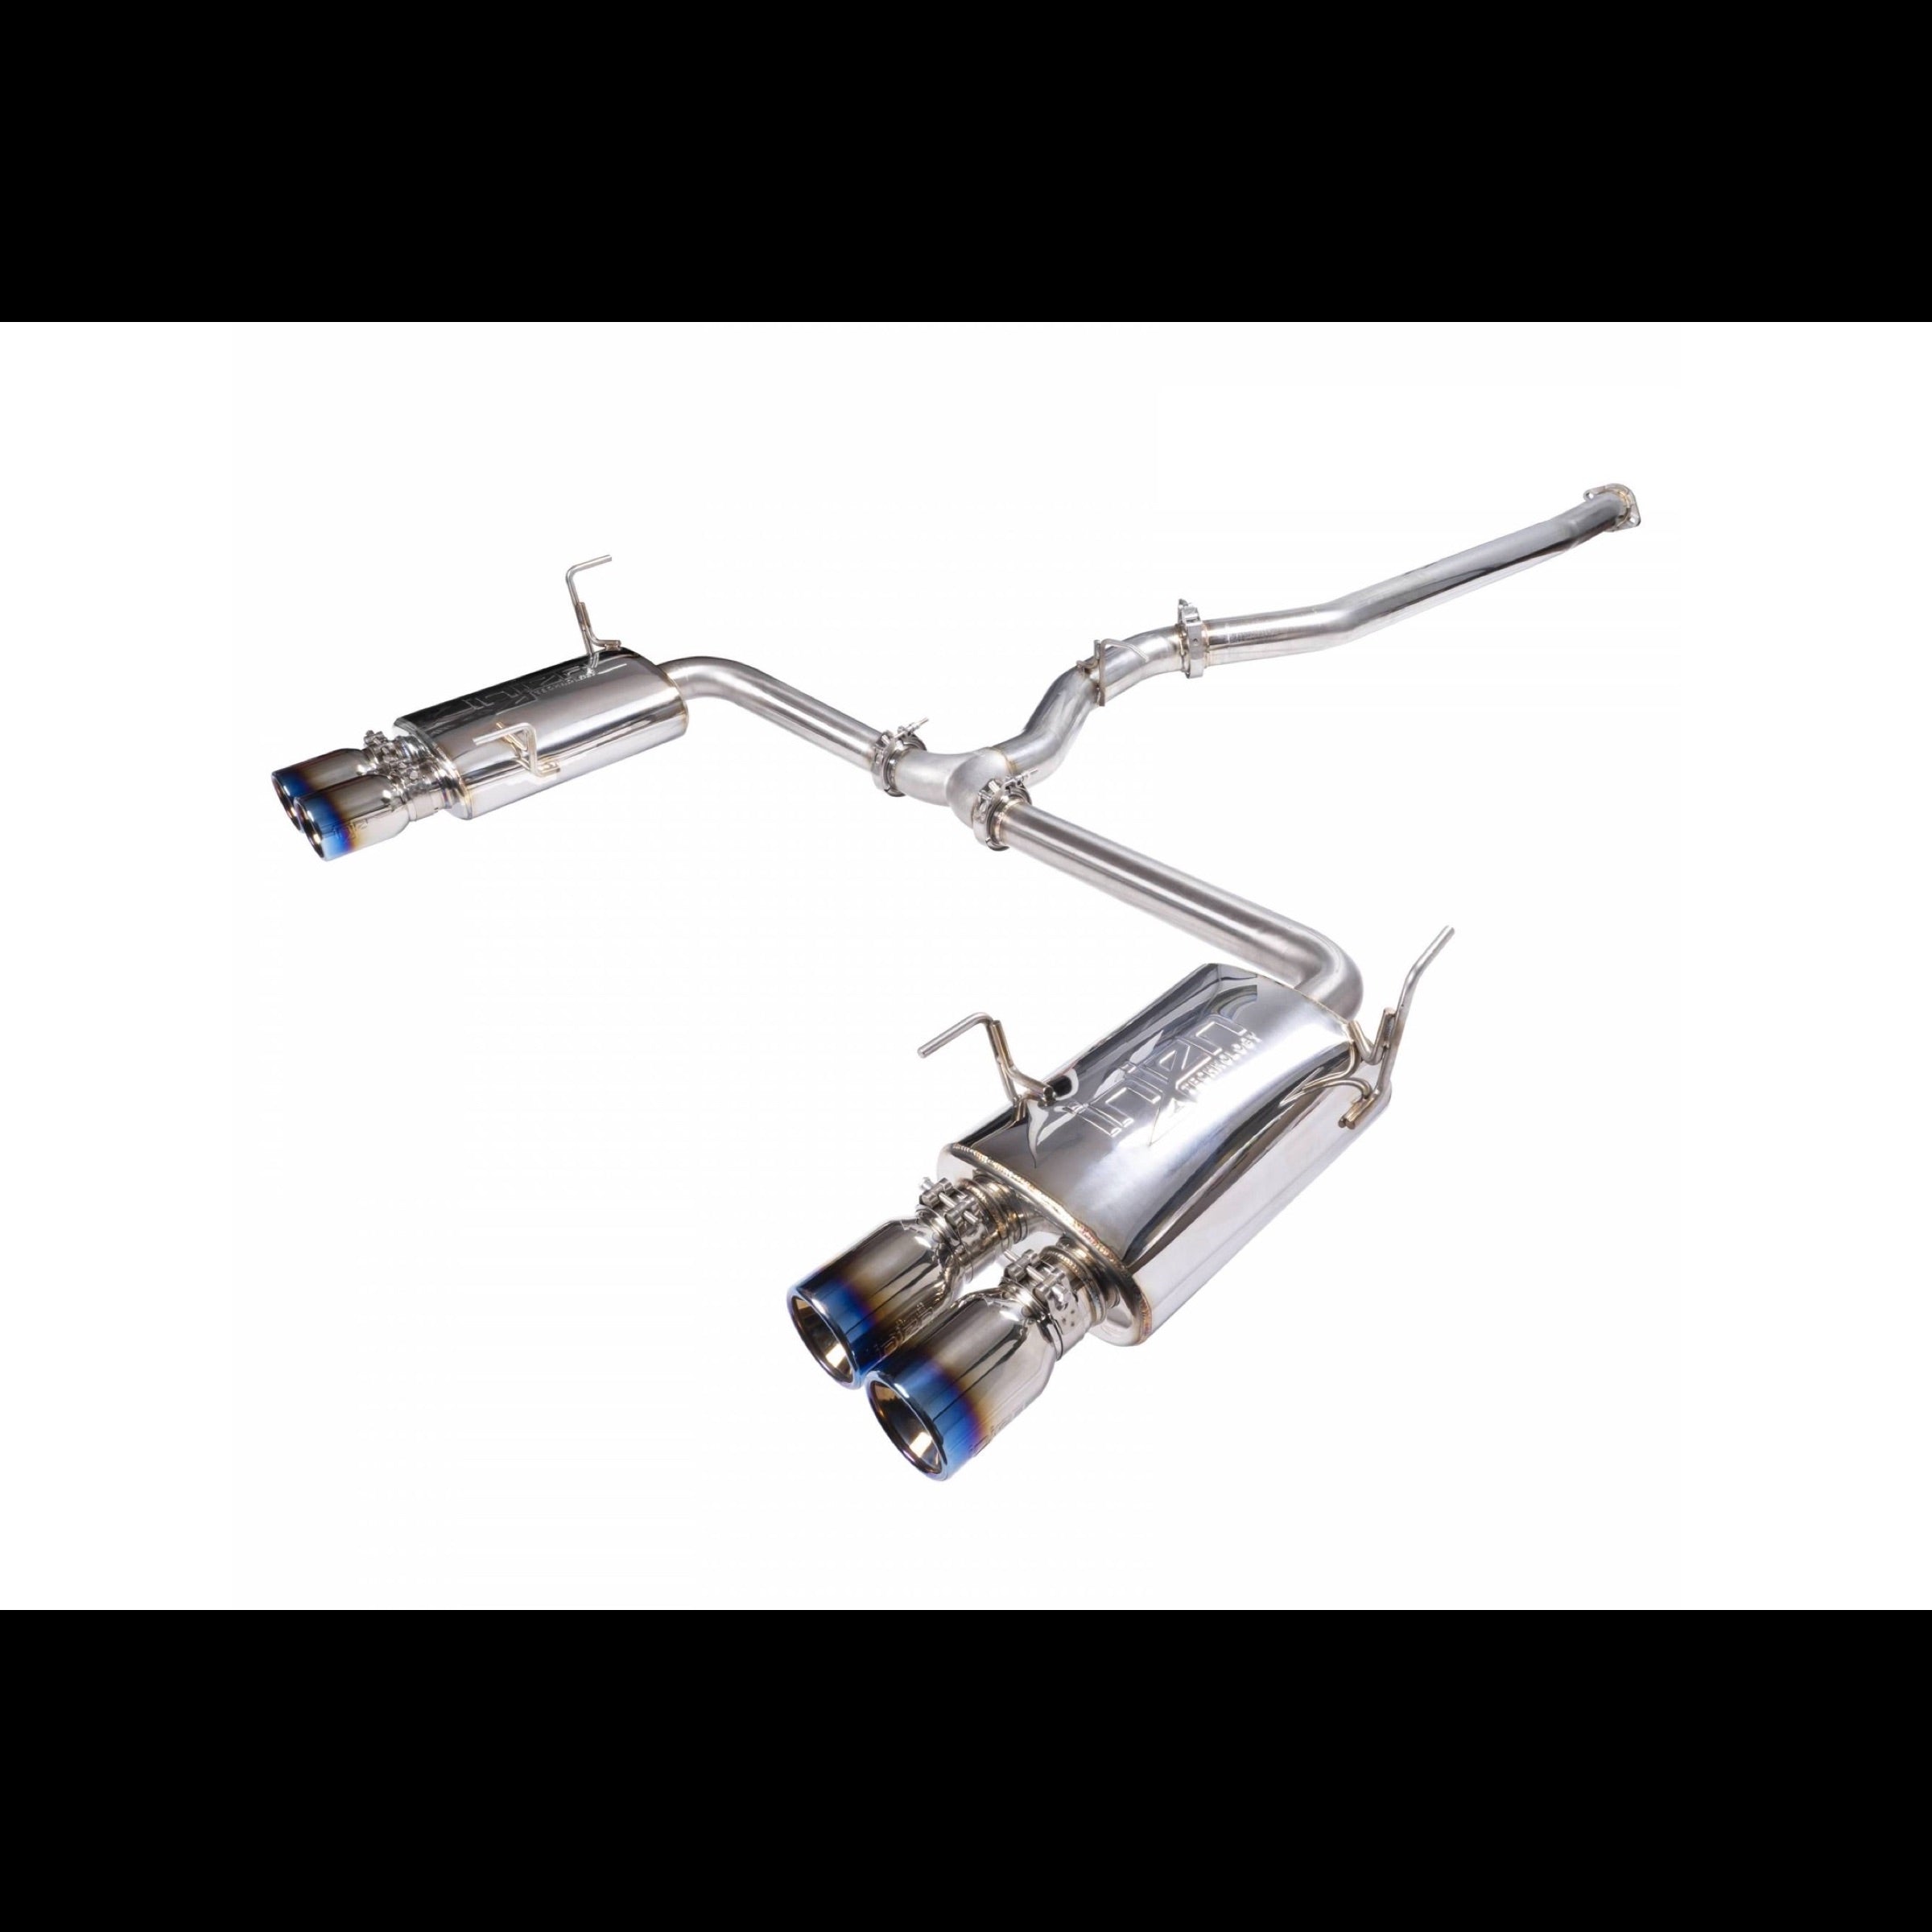 Injen Technology Subaru WRX STI Exhaust system with burnt titanuim tips and white background